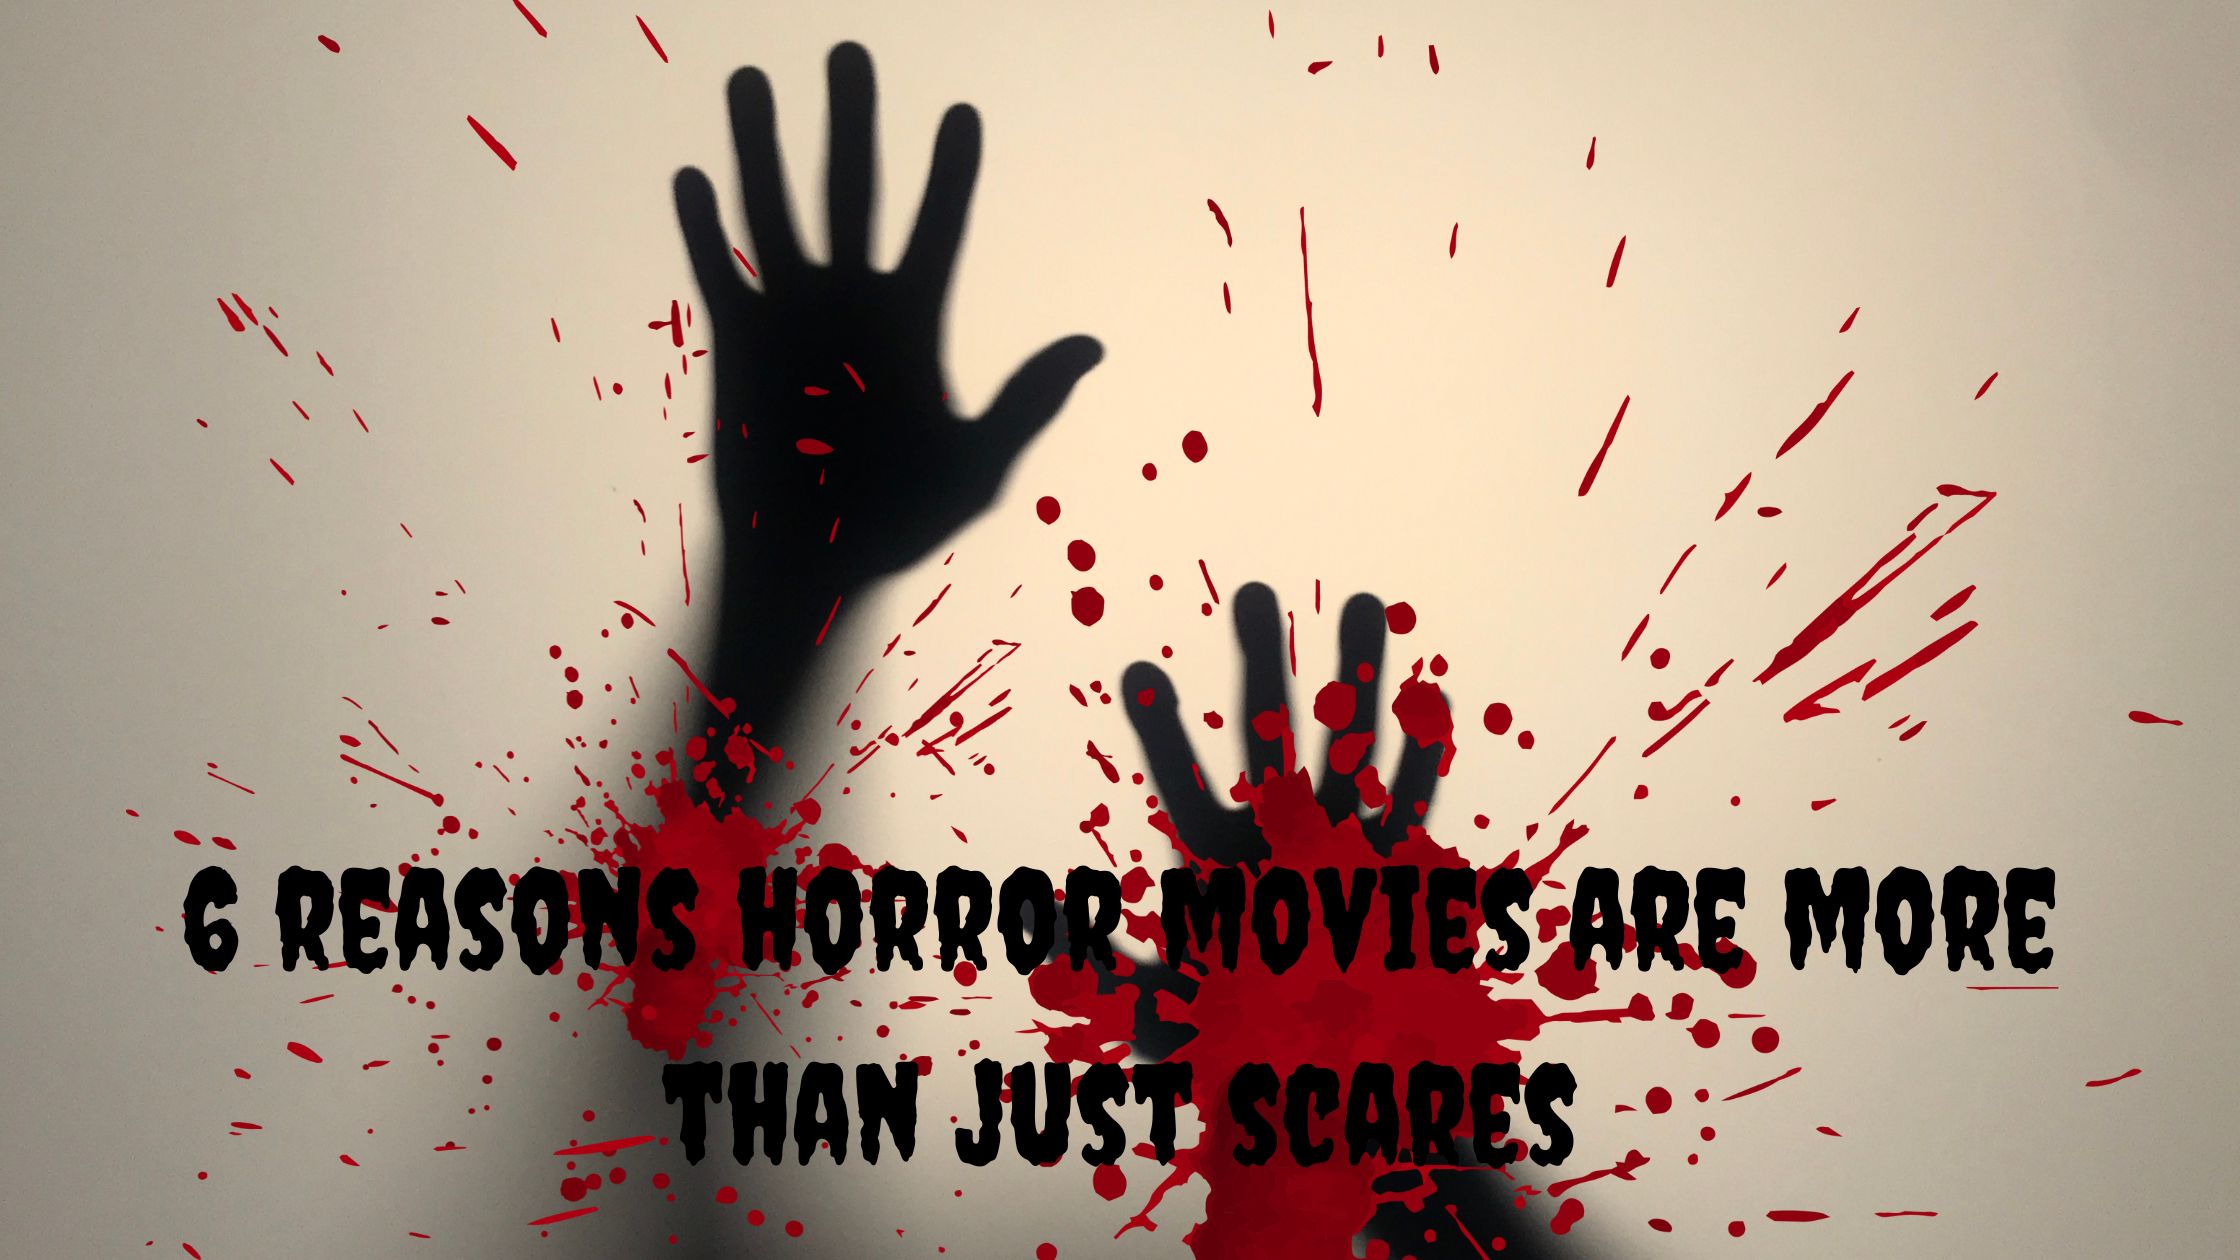 6 reasons horror movies are more than just scares